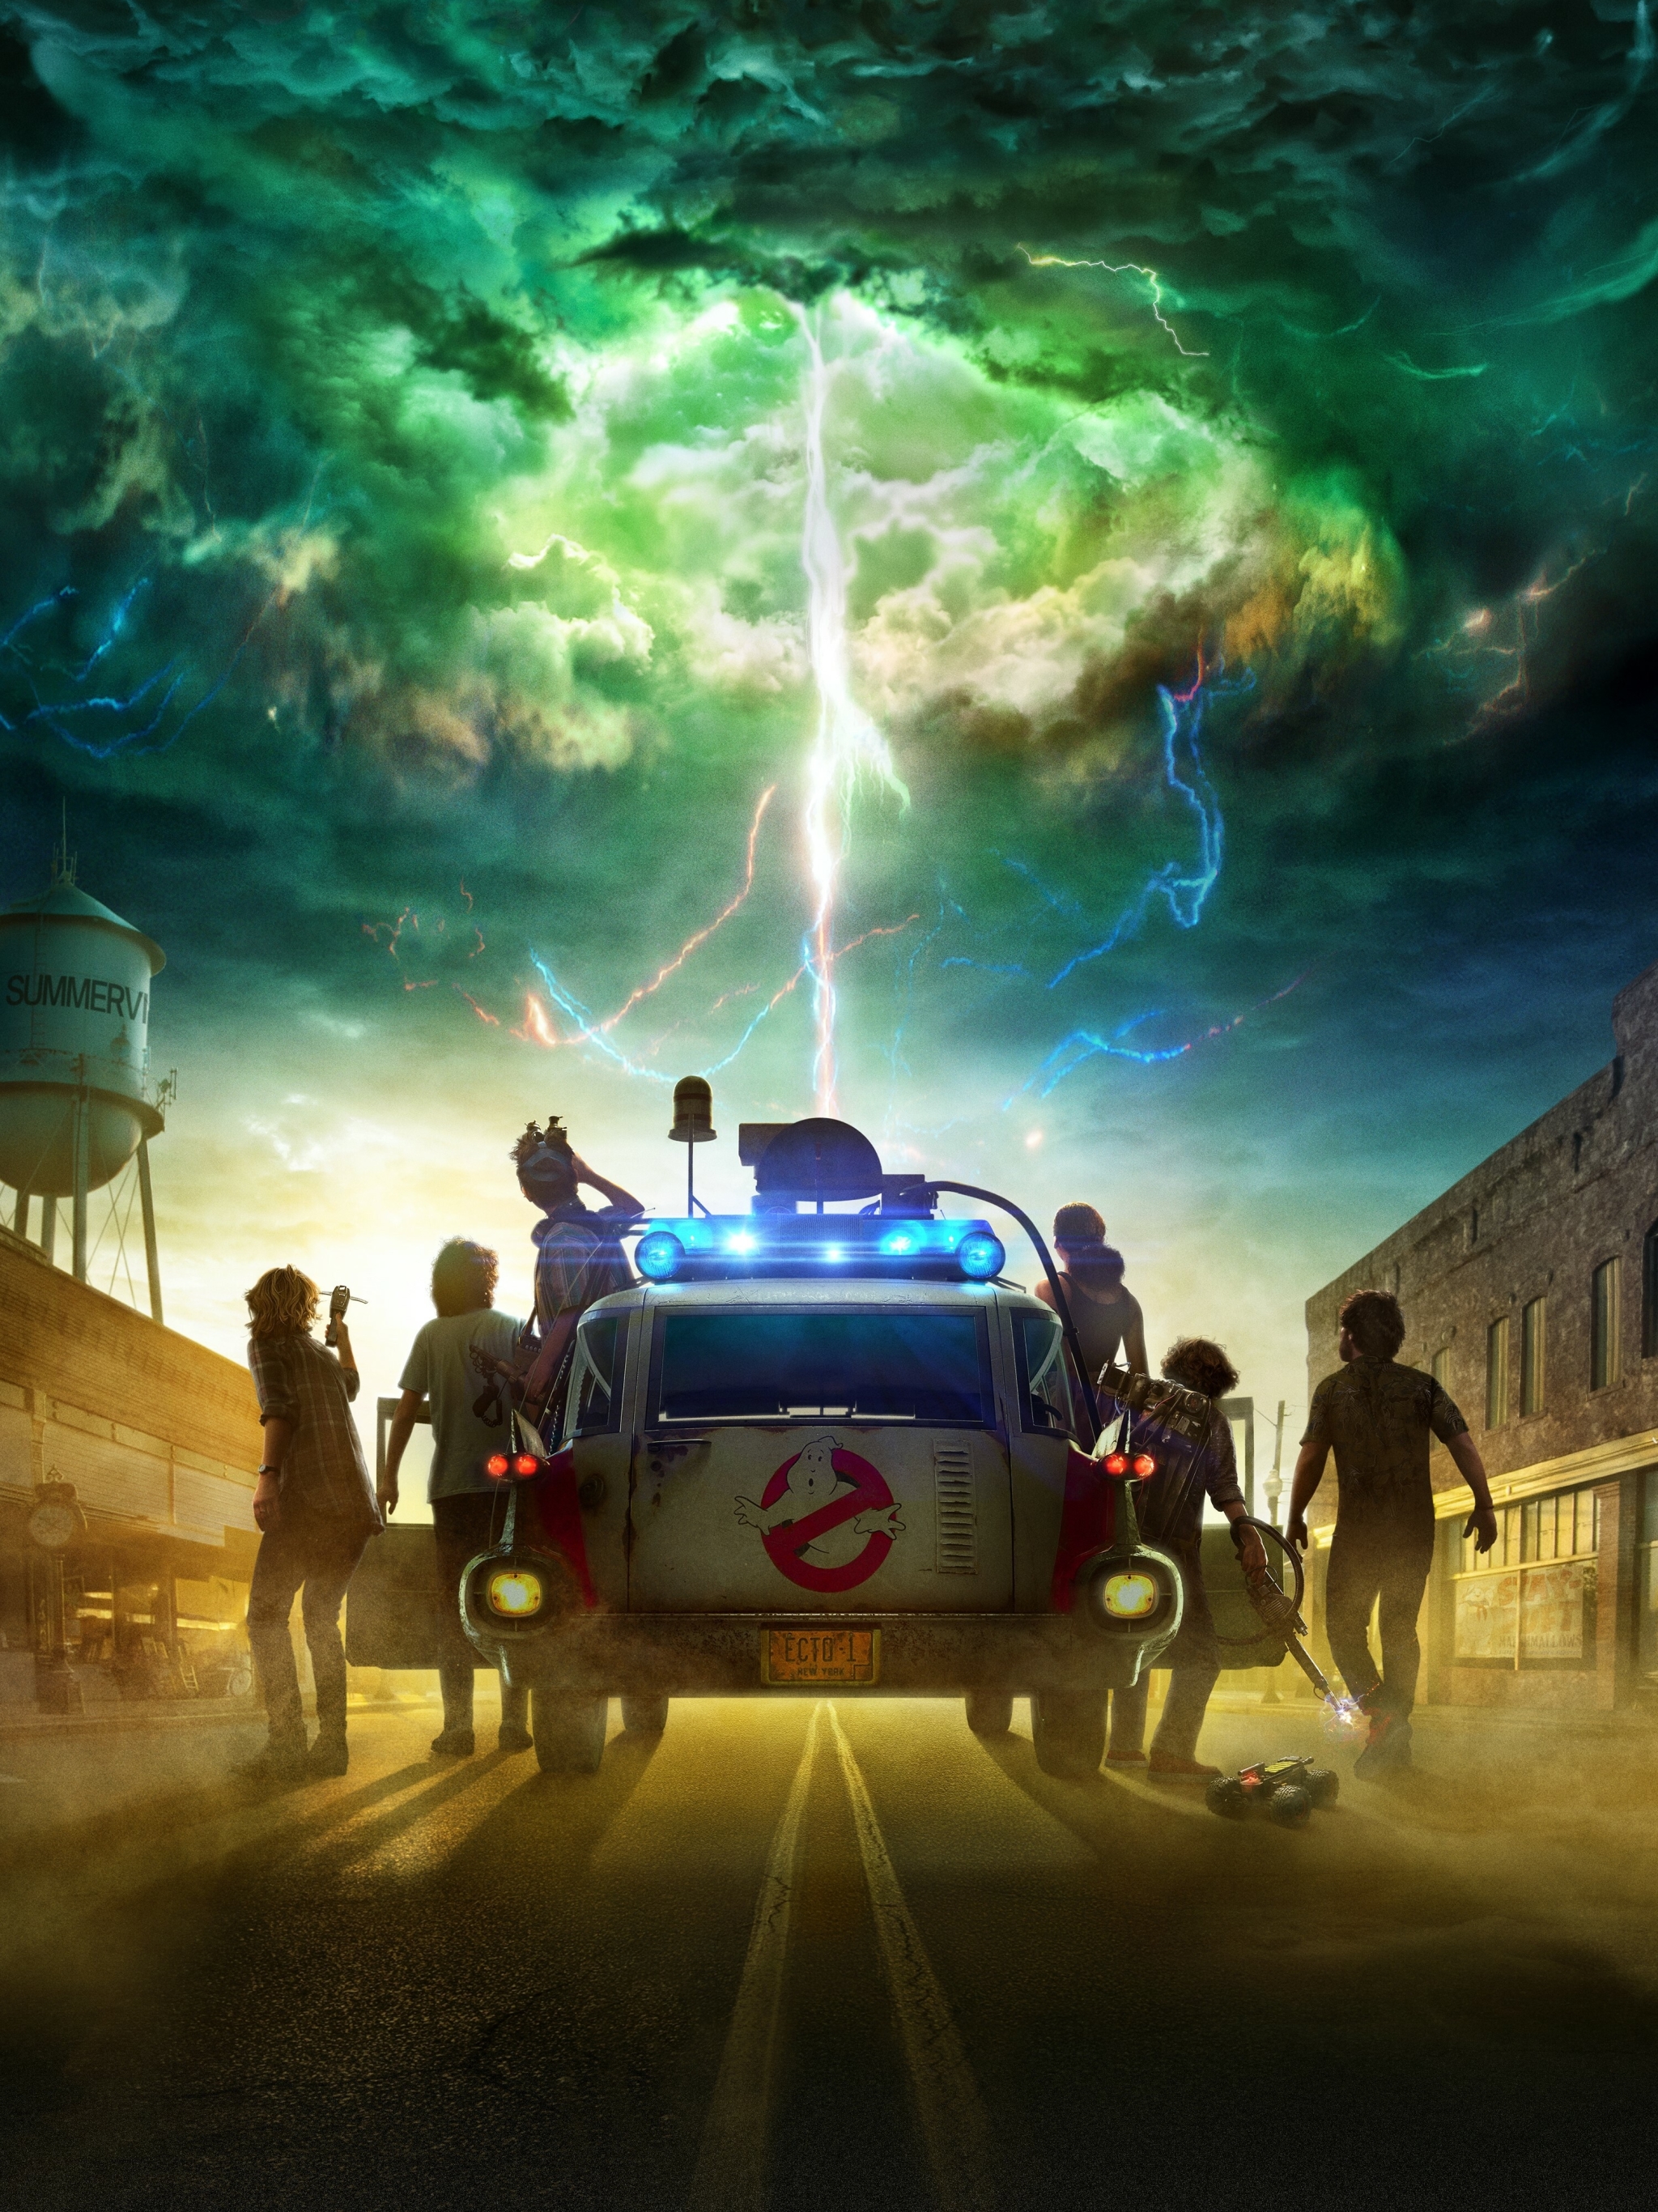 48x2732 Ghostbusters Afterlife Hd Movie 48x2732 Resolution Wallpaper Hd Movies 4k Wallpapers Images Photos And Background Wallpapers Den